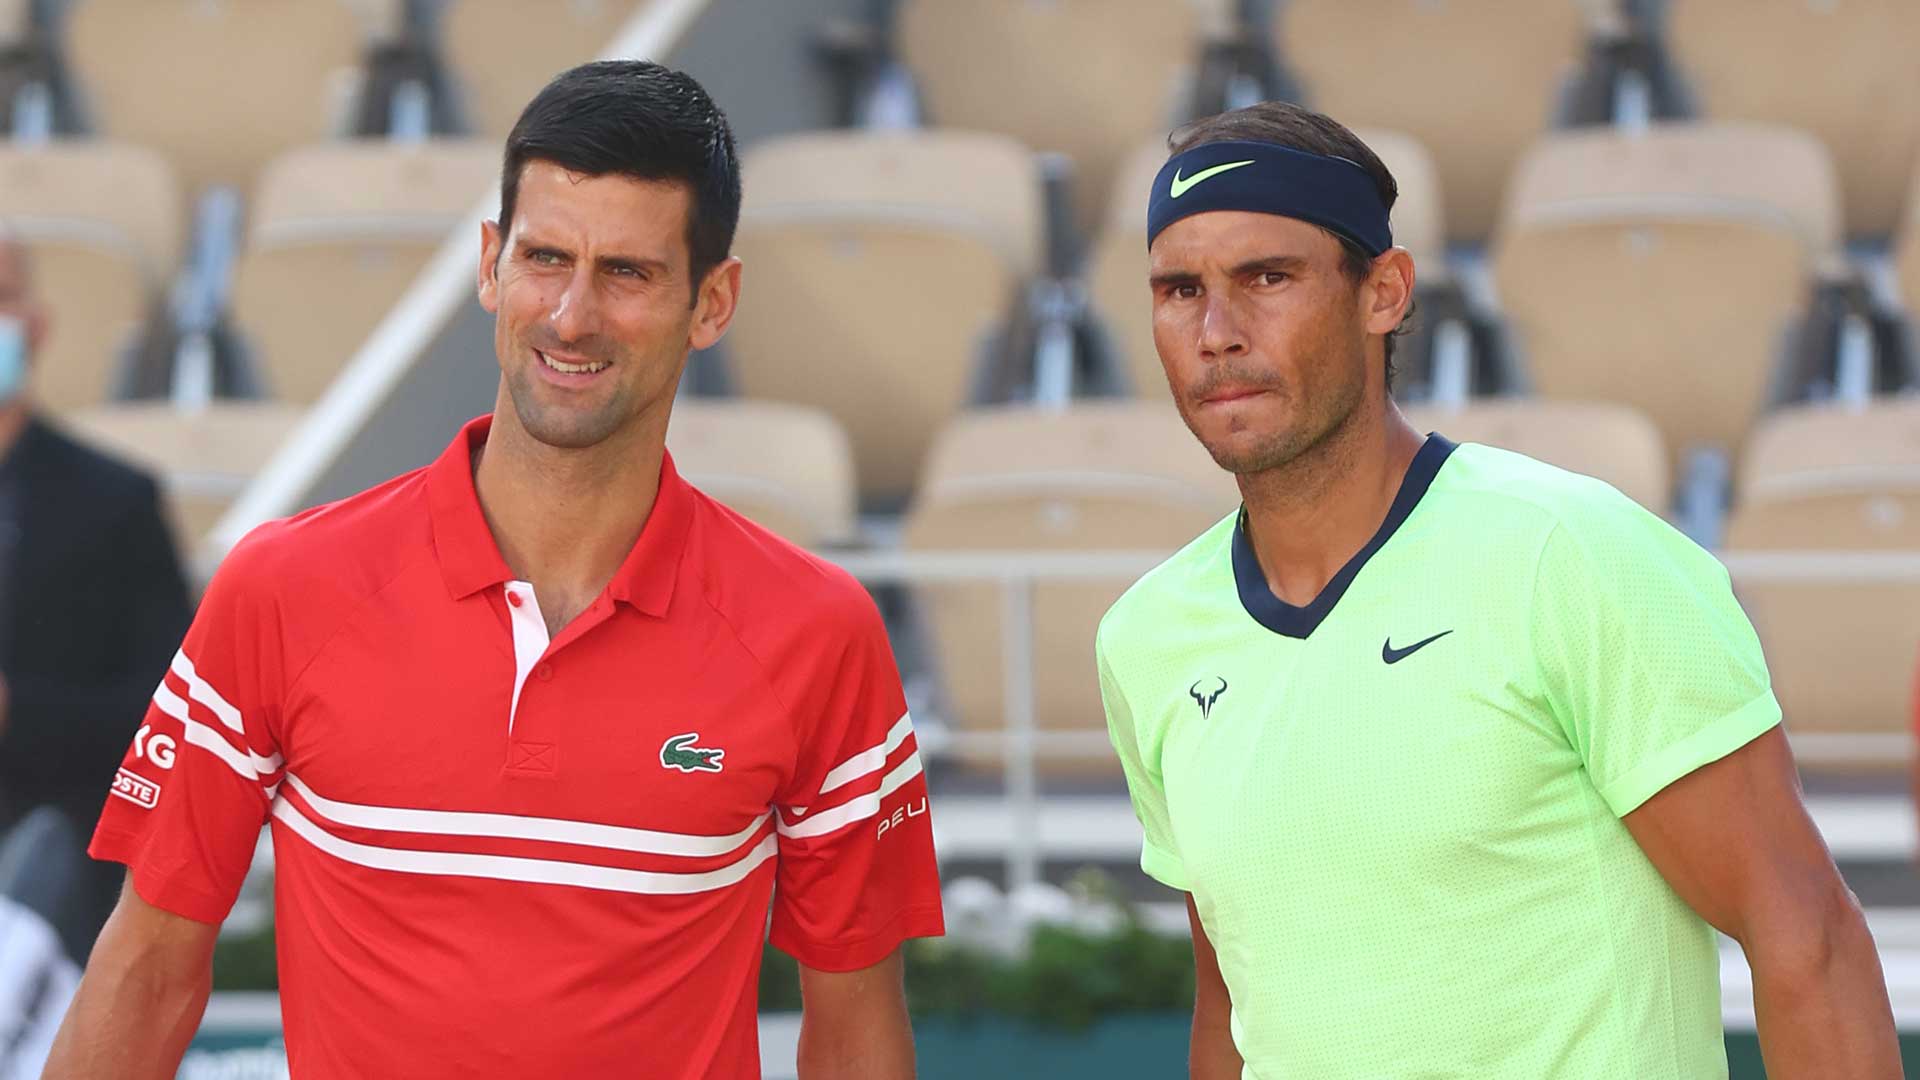 Novak Djokovic and Rafael Nadal have contested a record 59 ATP Head2Head matches in their historic rivalry.